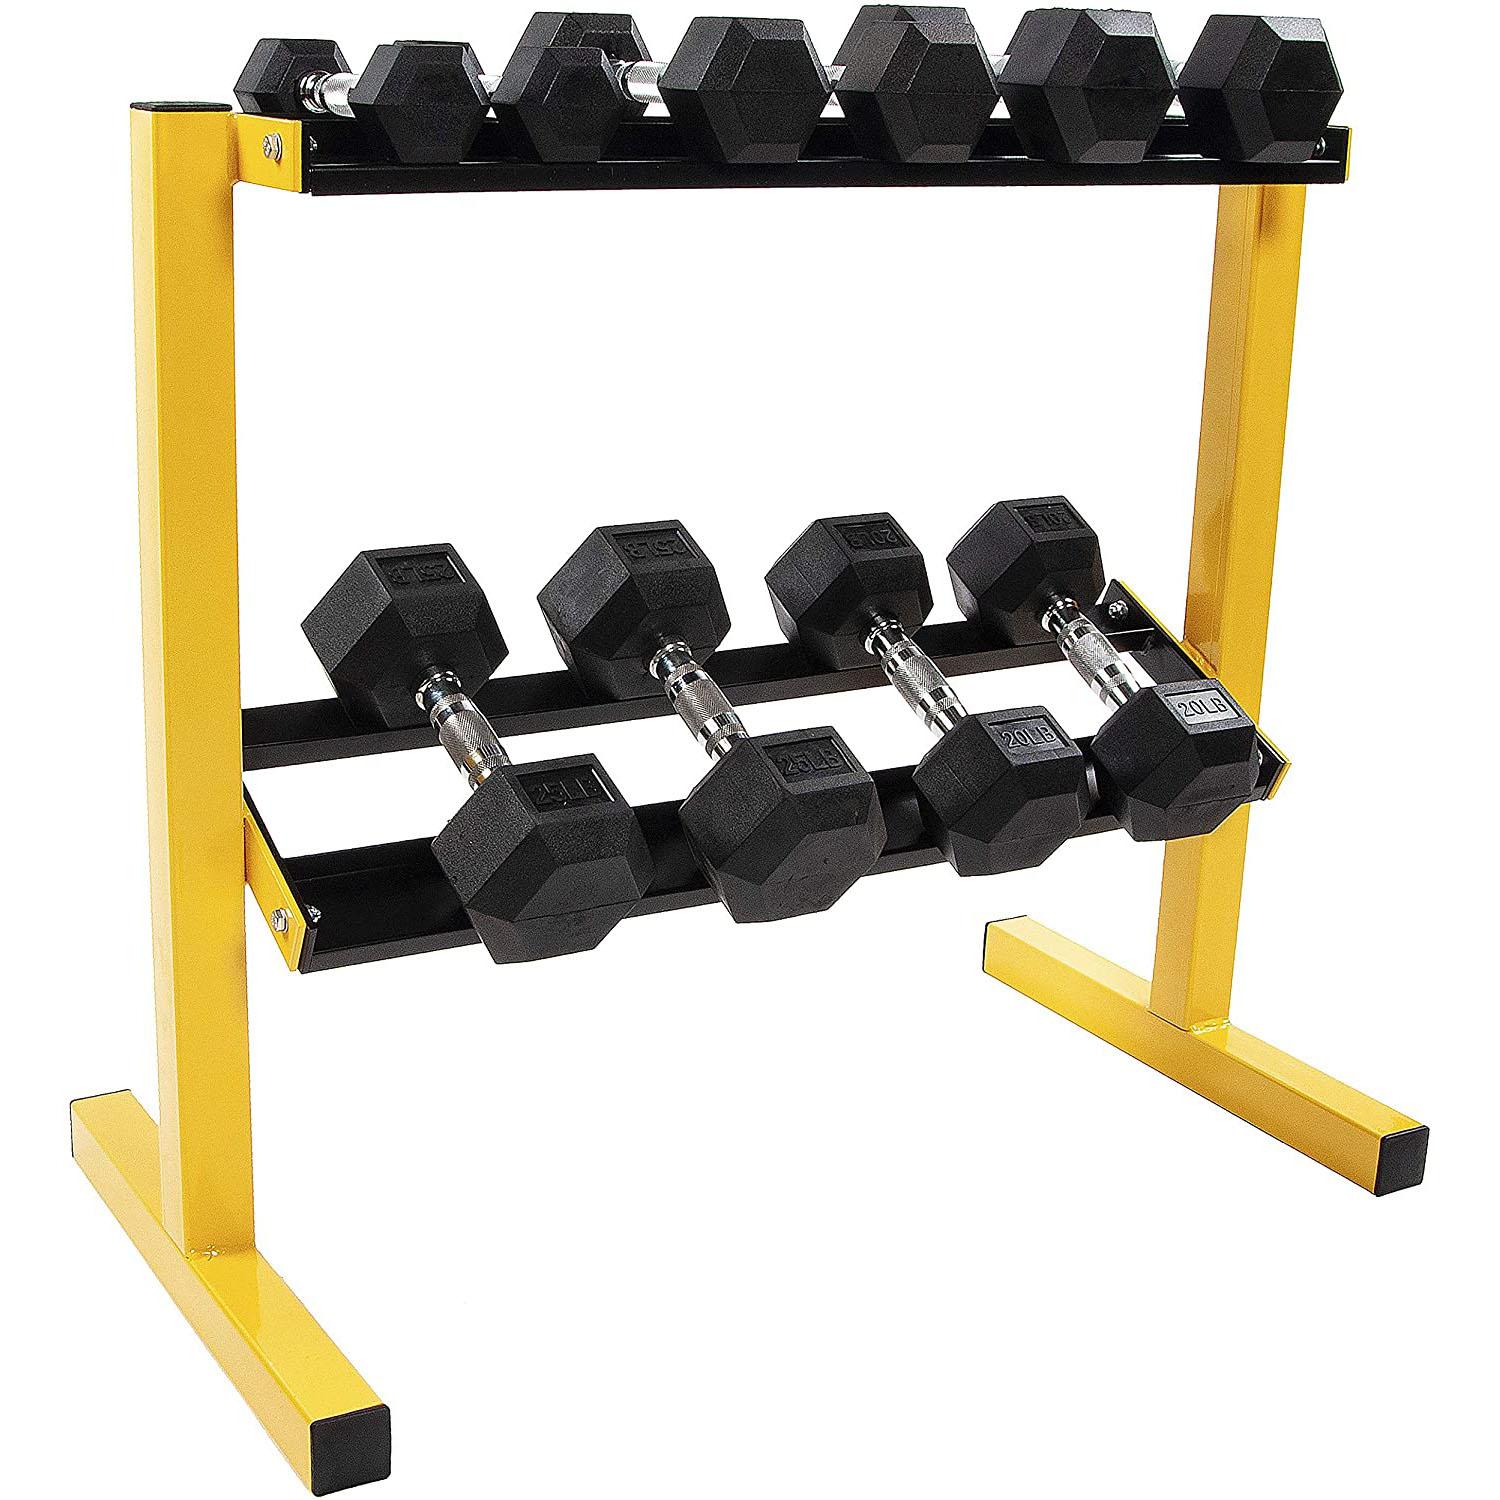 BalanceFrom 2-Tier Easy-Grab Dumbbell Rack for $62.09 Shipped